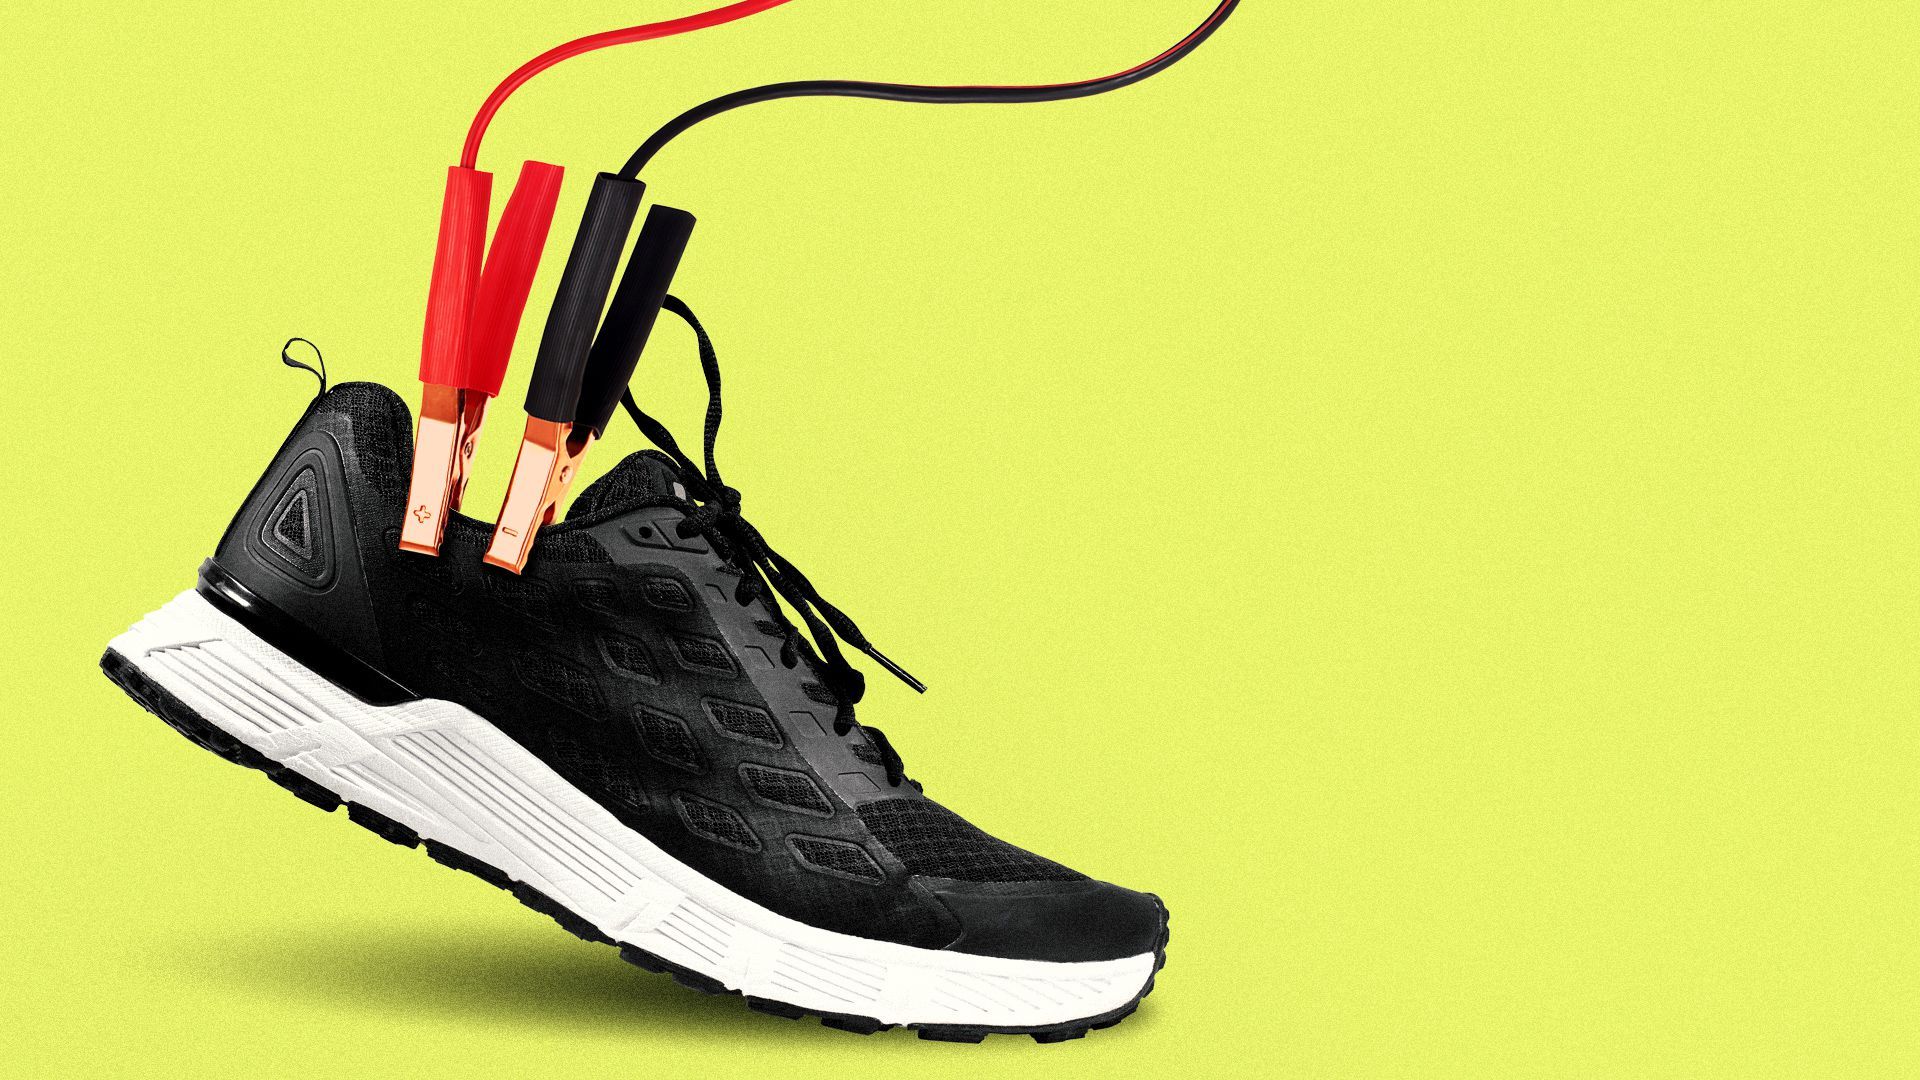 Illustration of jumper cables clipped on to a sneaker.